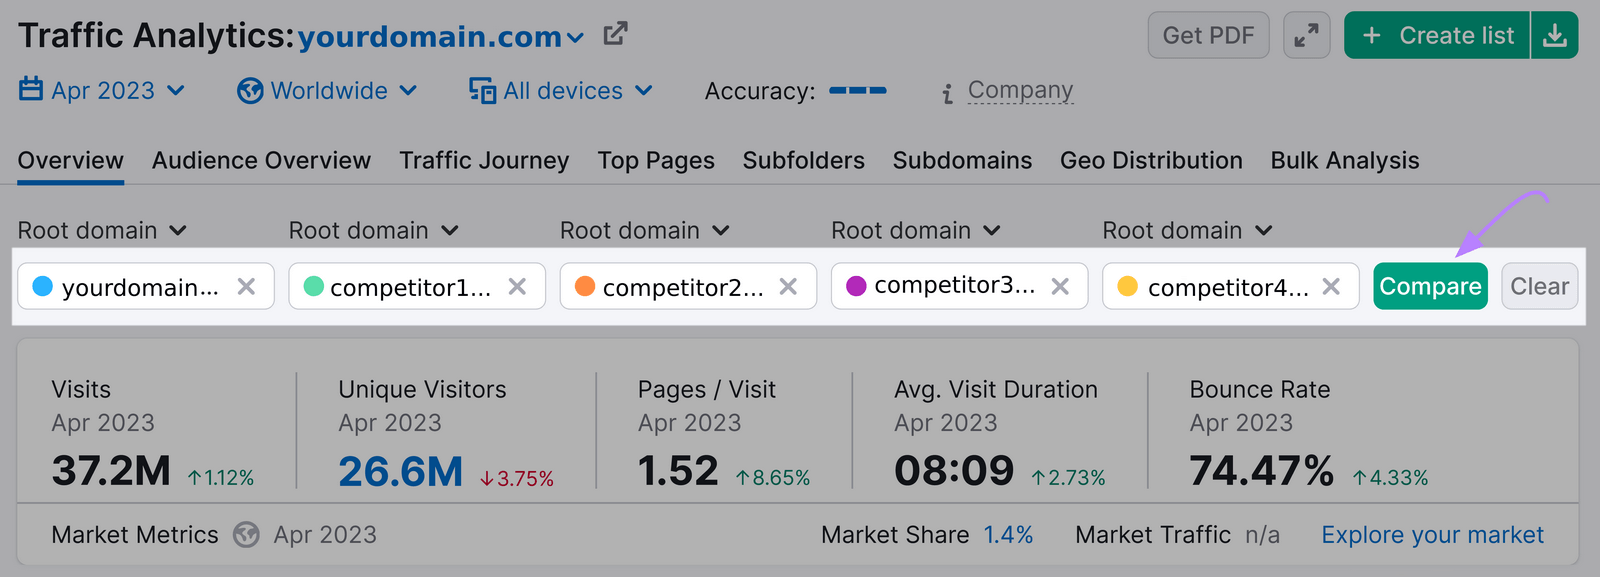 example of competitors and "Compare" button highlighted in Traffic Analytics tool